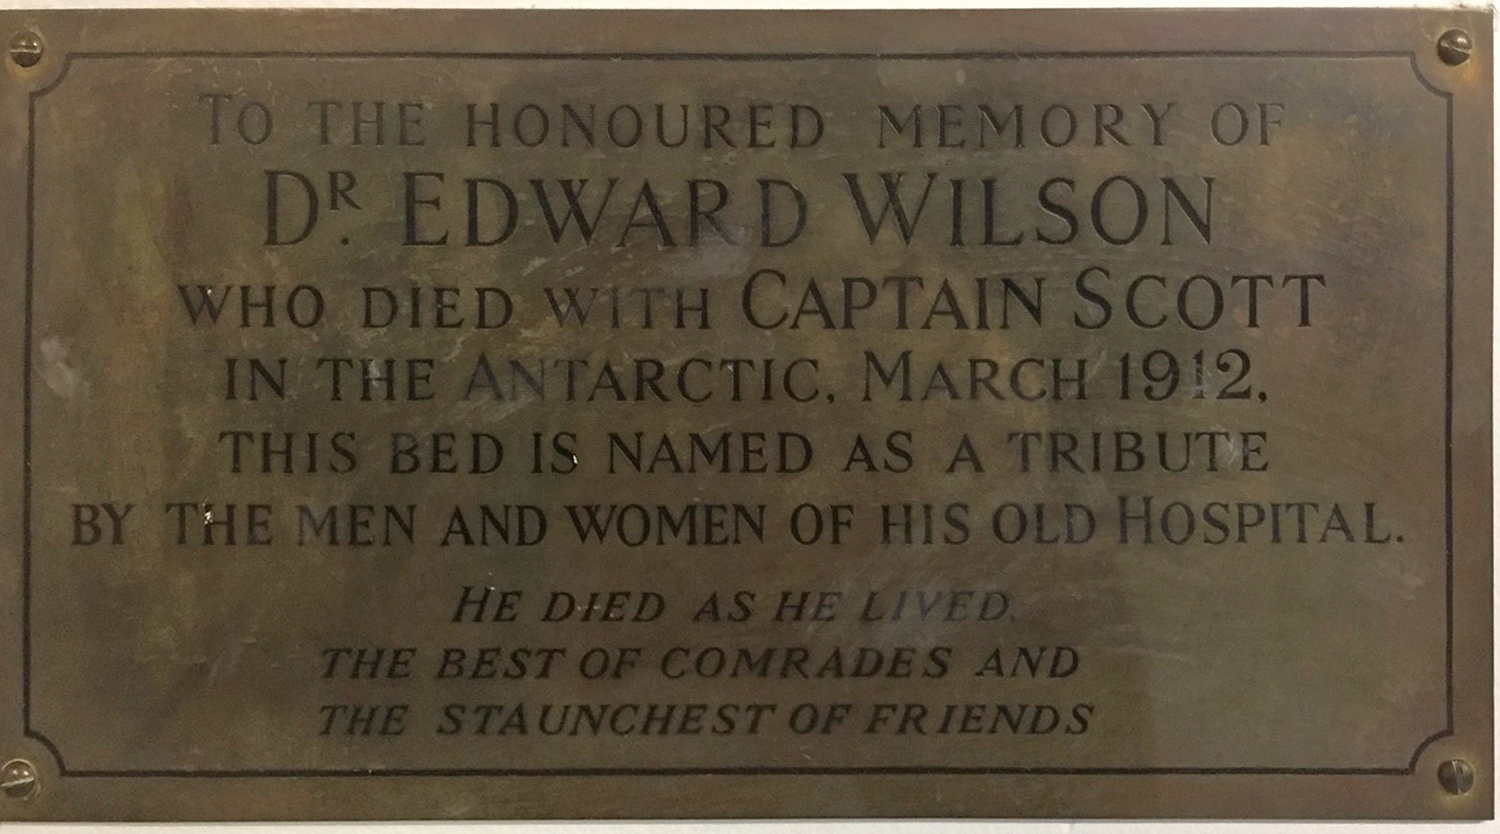 Plaque in St George's Hospital, Tooting